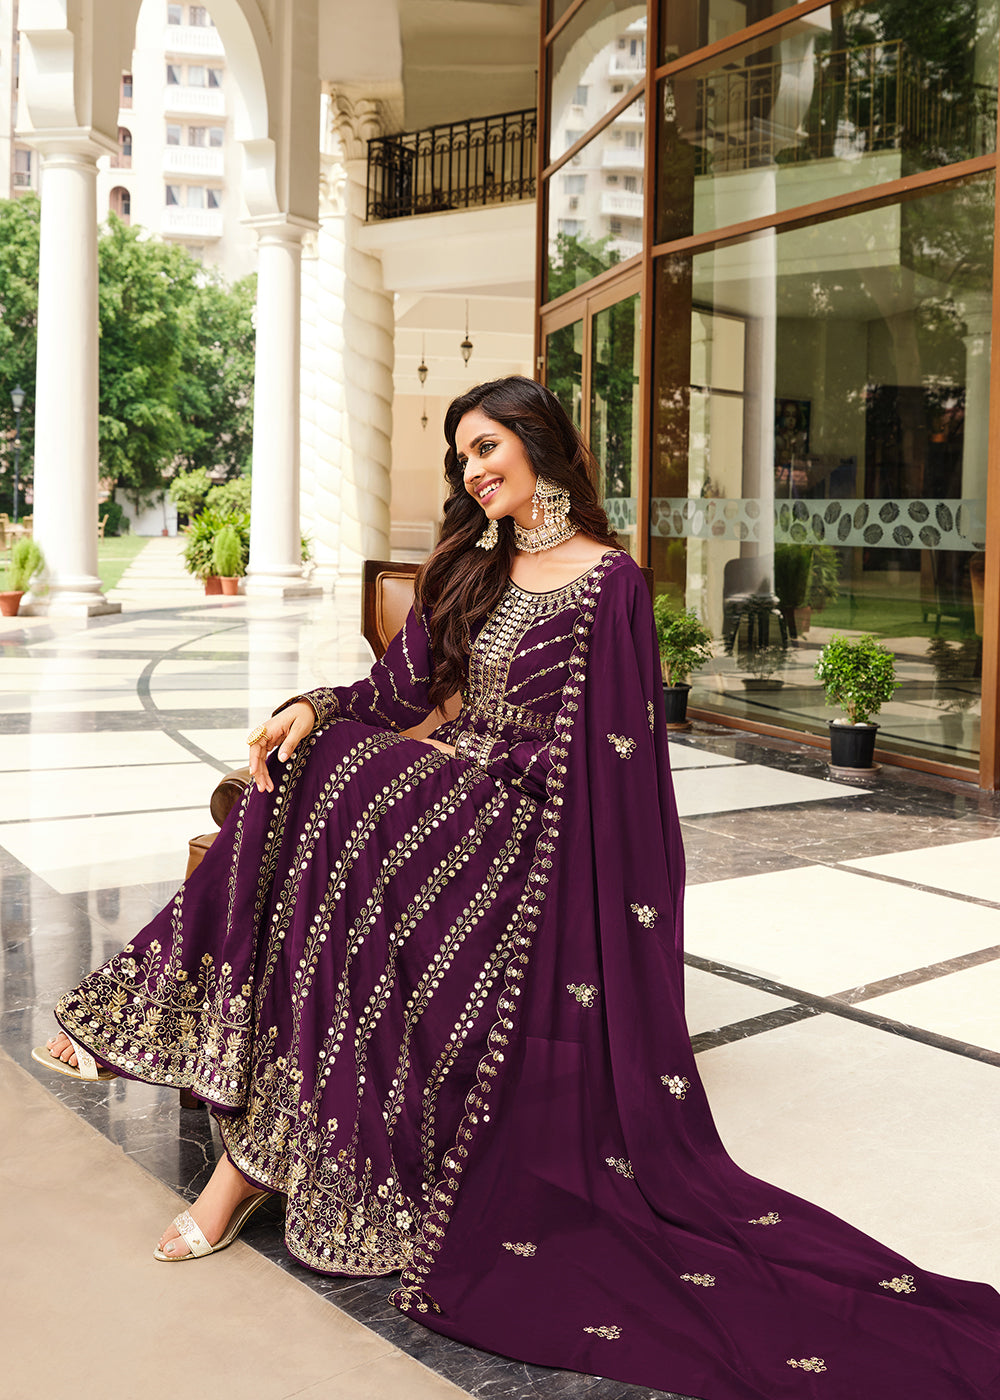 Buy Now Mesmeric Purple Sequins Wedding Pant Style Anarkali Suit Online in USA, UK, Australia, New Zealand, Canada & Worldwide at Empress Clothing.